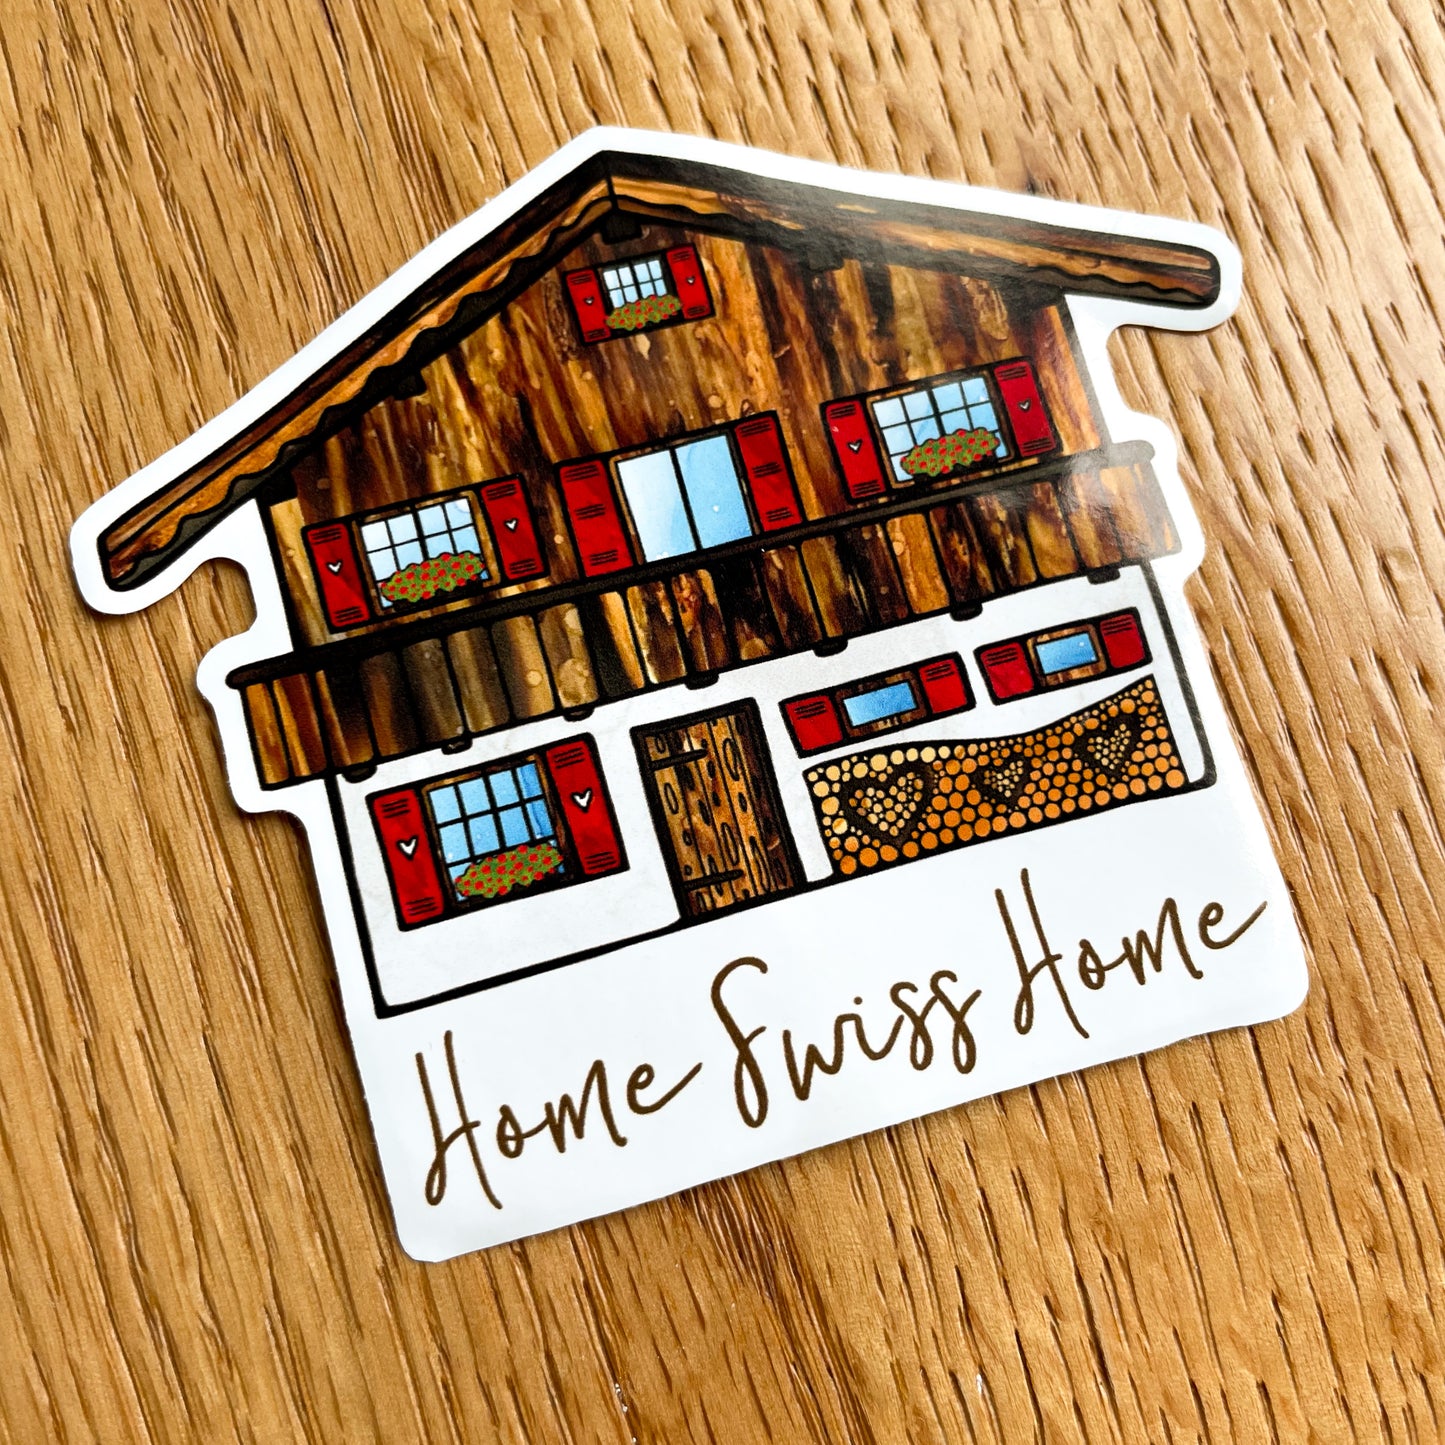 Bring home the memories of Switzerland with this vibrant vinyl sticker featuring an iconic Swiss Chalet design - a true collector's item.